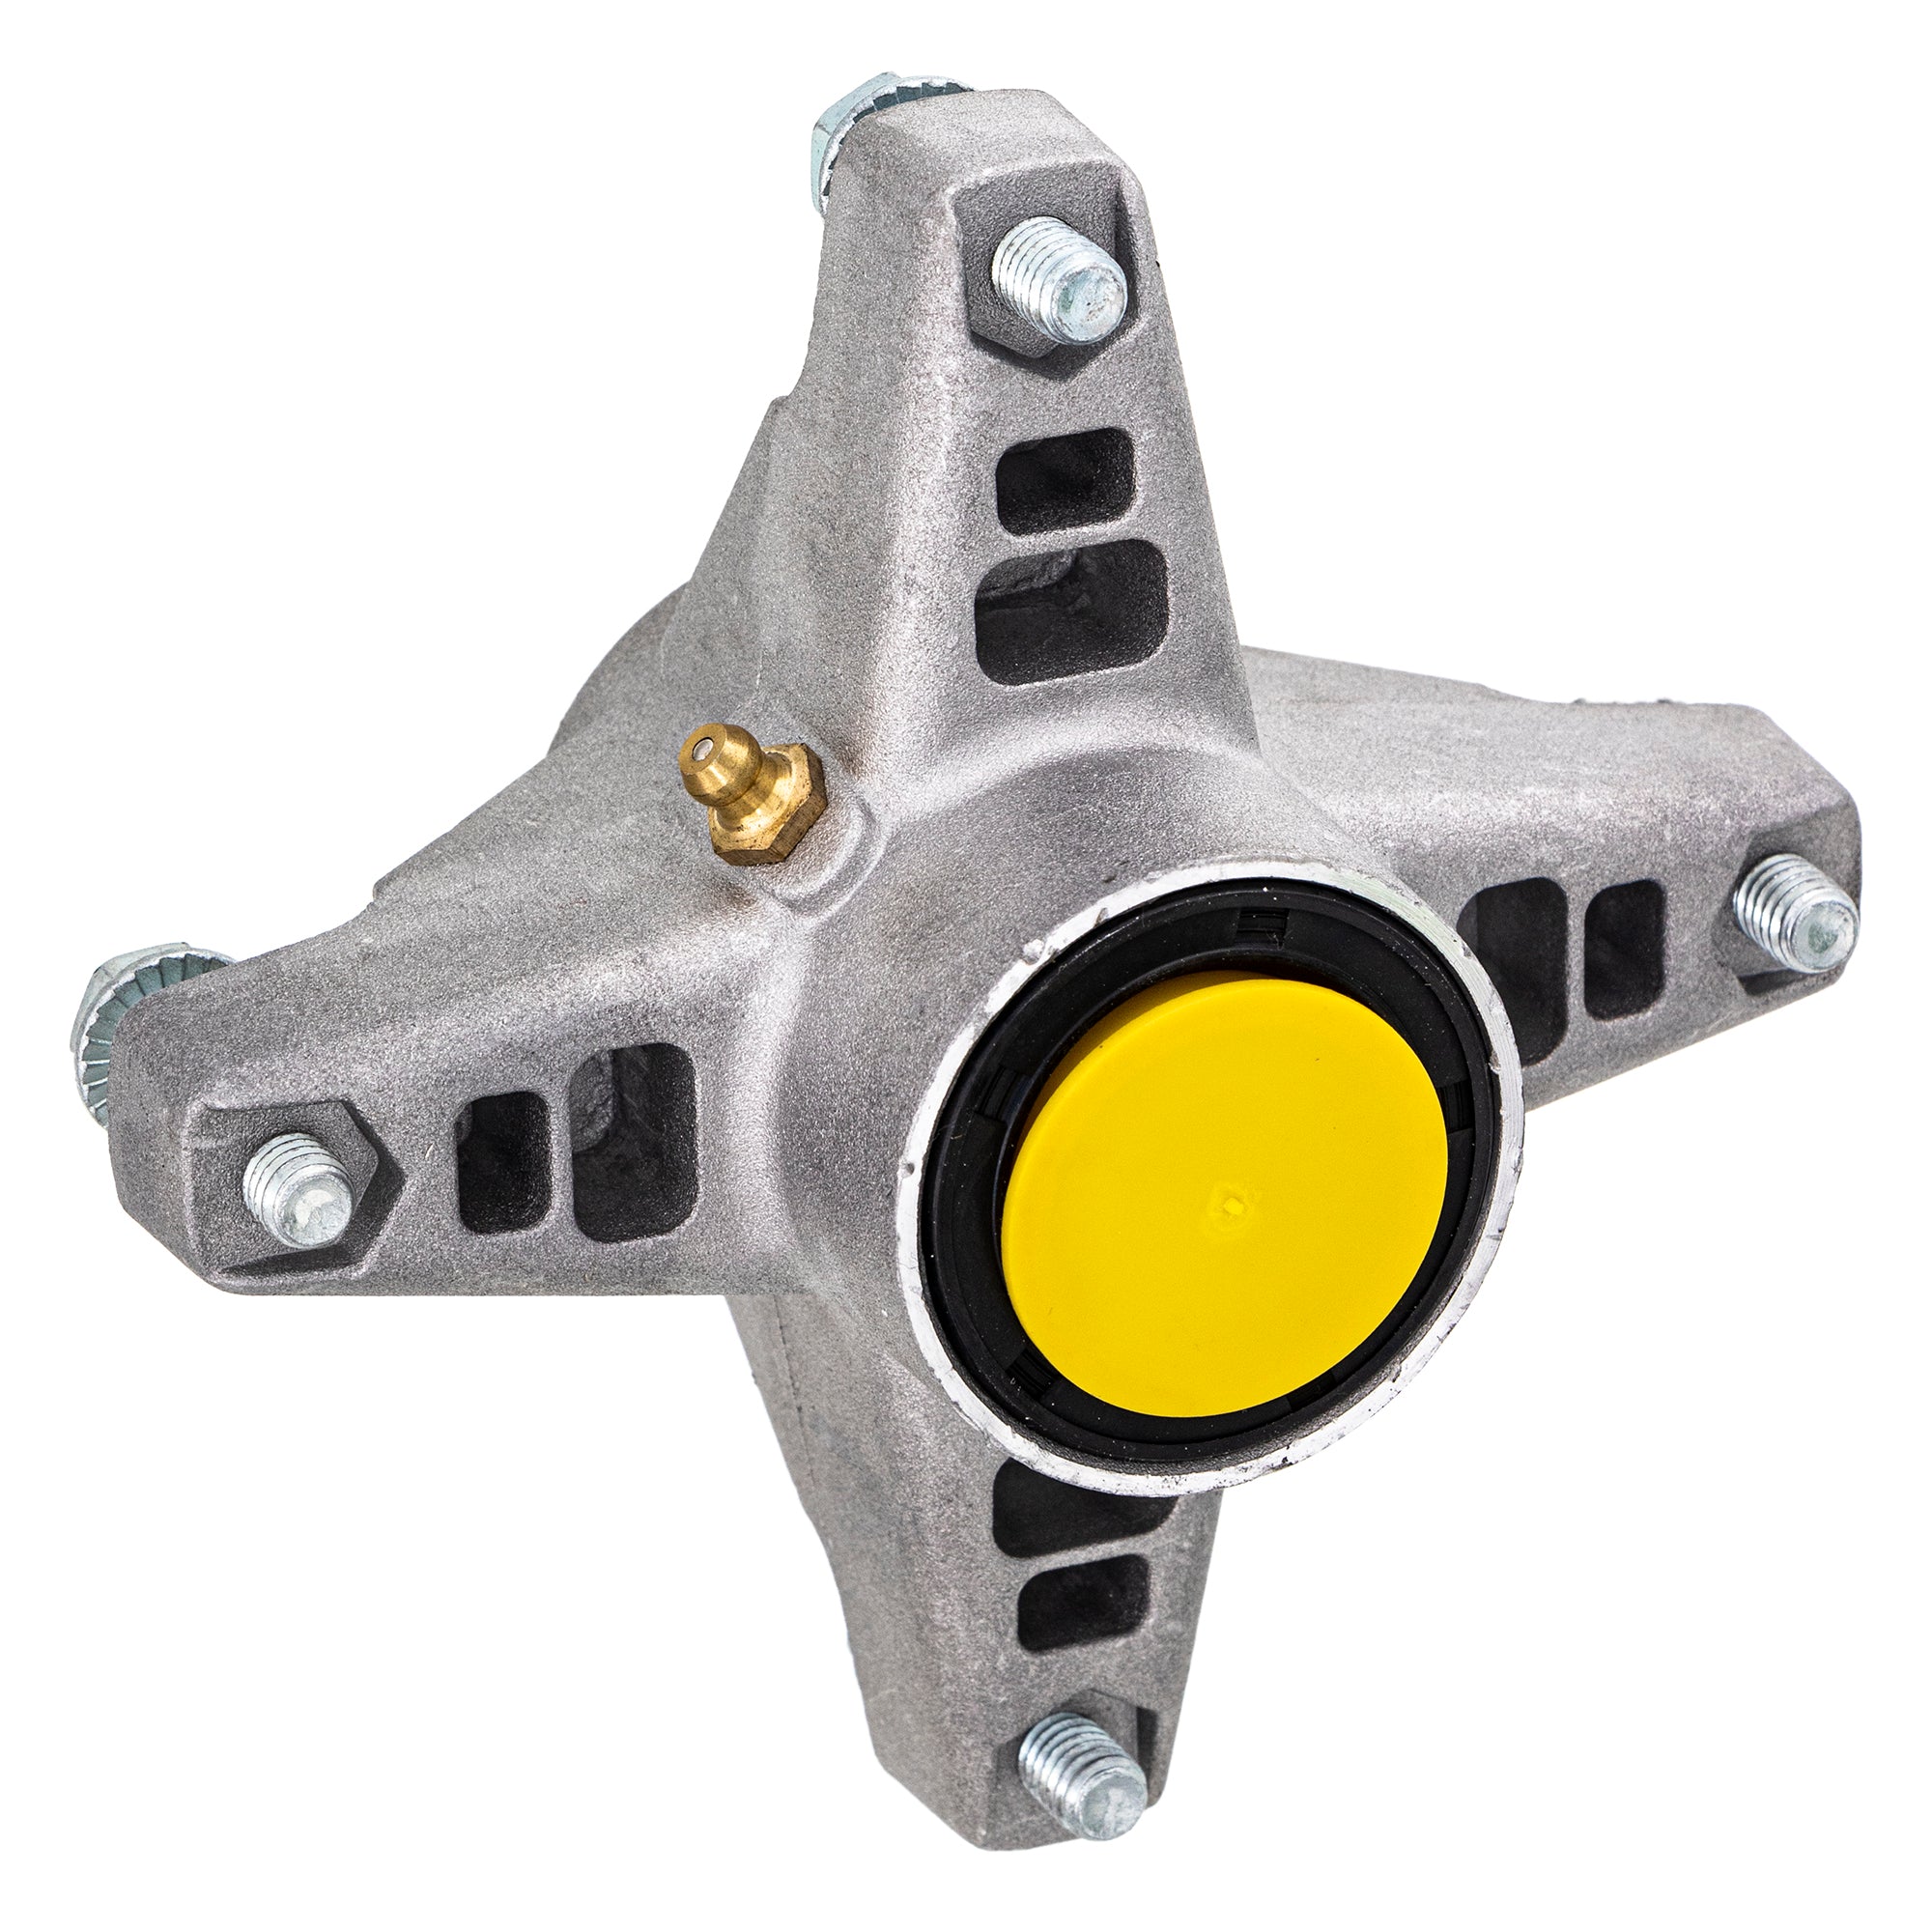 Deck Spindle For Cub Cadet White Outdoor Craftsman 918-3129C 918-04394  618-04426 618-3129C 918-04426